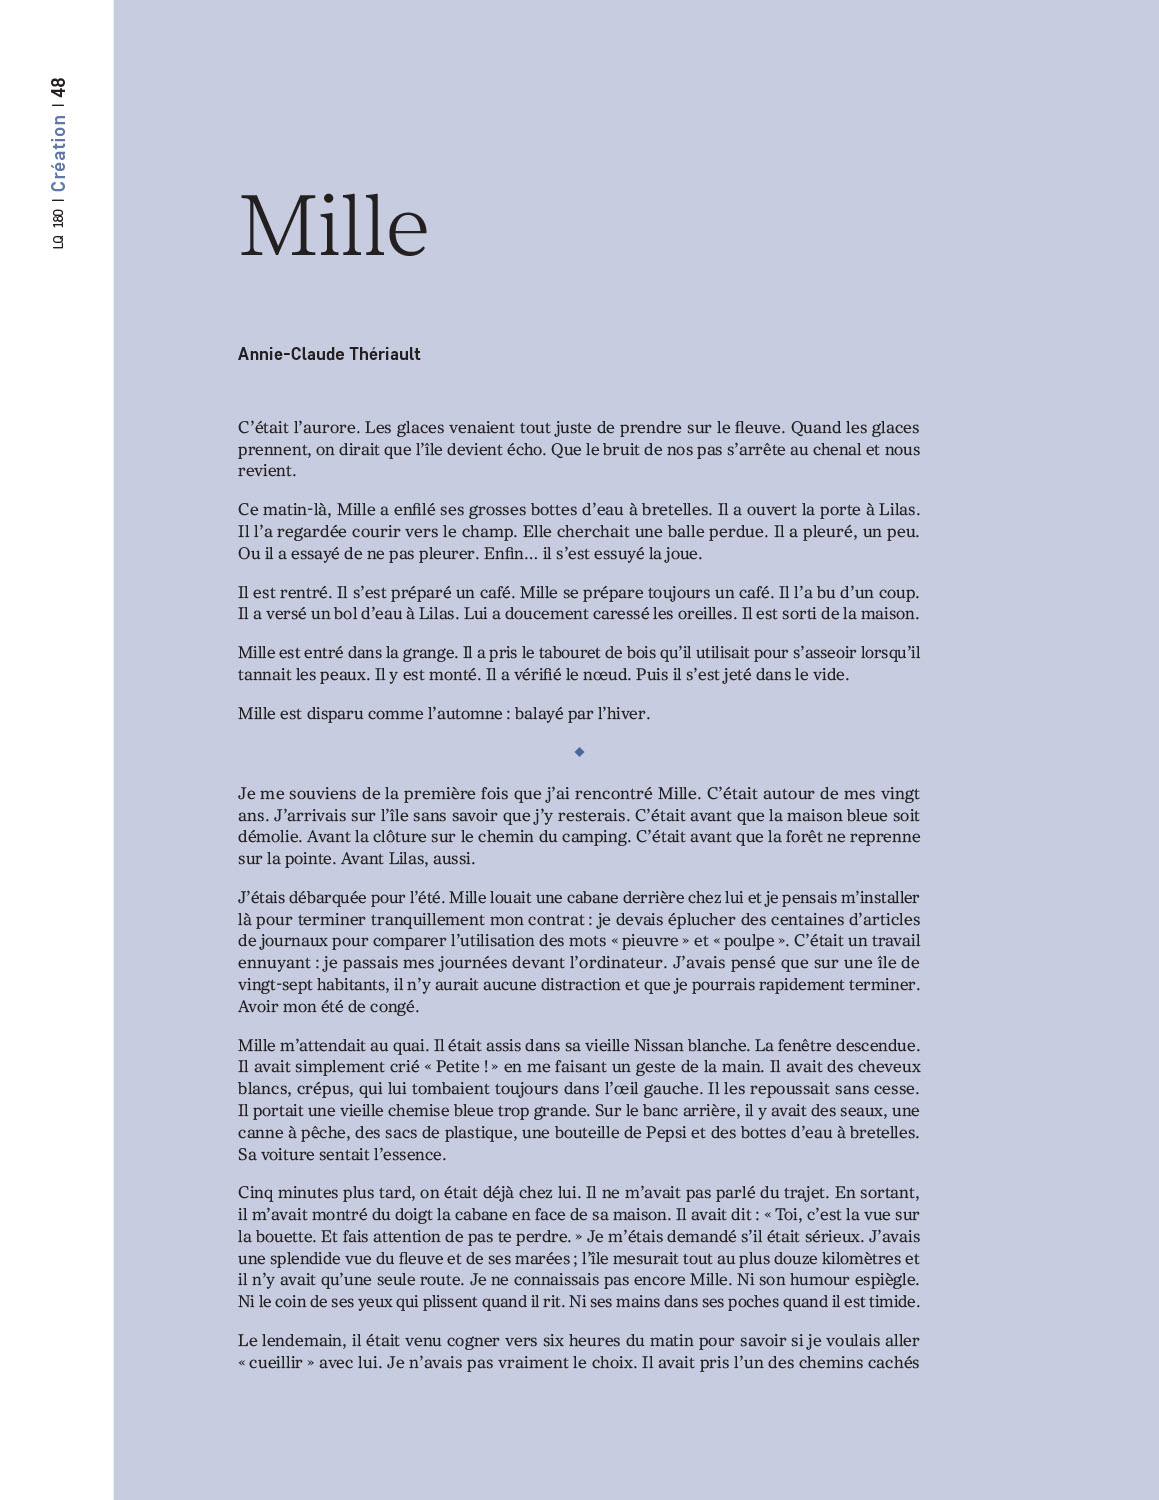 Mille 1